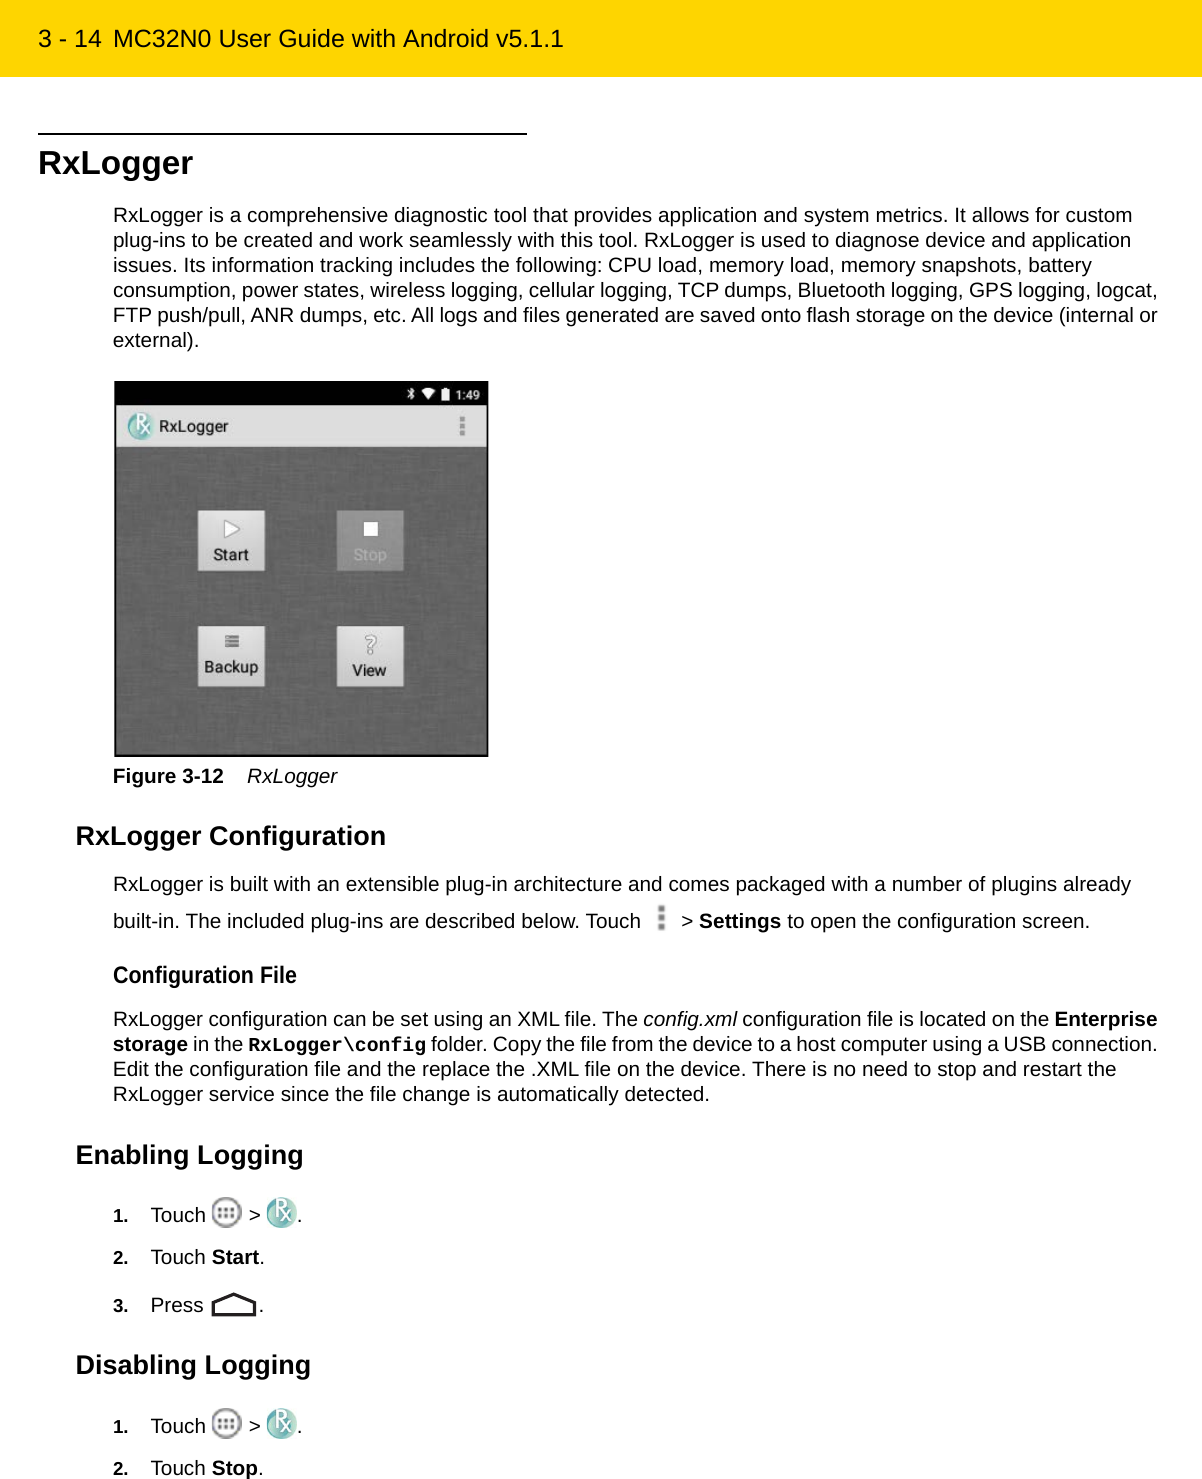 3 - 14 MC32N0 User Guide with Android v5.1.1RxLoggerRxLogger is a comprehensive diagnostic tool that provides application and system metrics. It allows for custom plug-ins to be created and work seamlessly with this tool. RxLogger is used to diagnose device and application issues. Its information tracking includes the following: CPU load, memory load, memory snapshots, battery consumption, power states, wireless logging, cellular logging, TCP dumps, Bluetooth logging, GPS logging, logcat, FTP push/pull, ANR dumps, etc. All logs and files generated are saved onto flash storage on the device (internal or external).Figure 3-12    RxLoggerRxLogger ConfigurationRxLogger is built with an extensible plug-in architecture and comes packaged with a number of plugins already built-in. The included plug-ins are described below. Touch   &gt; Settings to open the configuration screen.Configuration FileRxLogger configuration can be set using an XML file. The config.xml configuration file is located on the Enterprise storage in the RxLogger\config folder. Copy the file from the device to a host computer using a USB connection. Edit the configuration file and the replace the .XML file on the device. There is no need to stop and restart the RxLogger service since the file change is automatically detected.Enabling Logging1. Touch  &gt; .2. Touch Start.3. Press .Disabling Logging1. Touch  &gt; .2. Touch Stop.REVIEW ONLY - REVIEW ONLY - REVIEW ONLY                             REVIEW ONLY - REVIEW ONLY - REVIEW ONLY